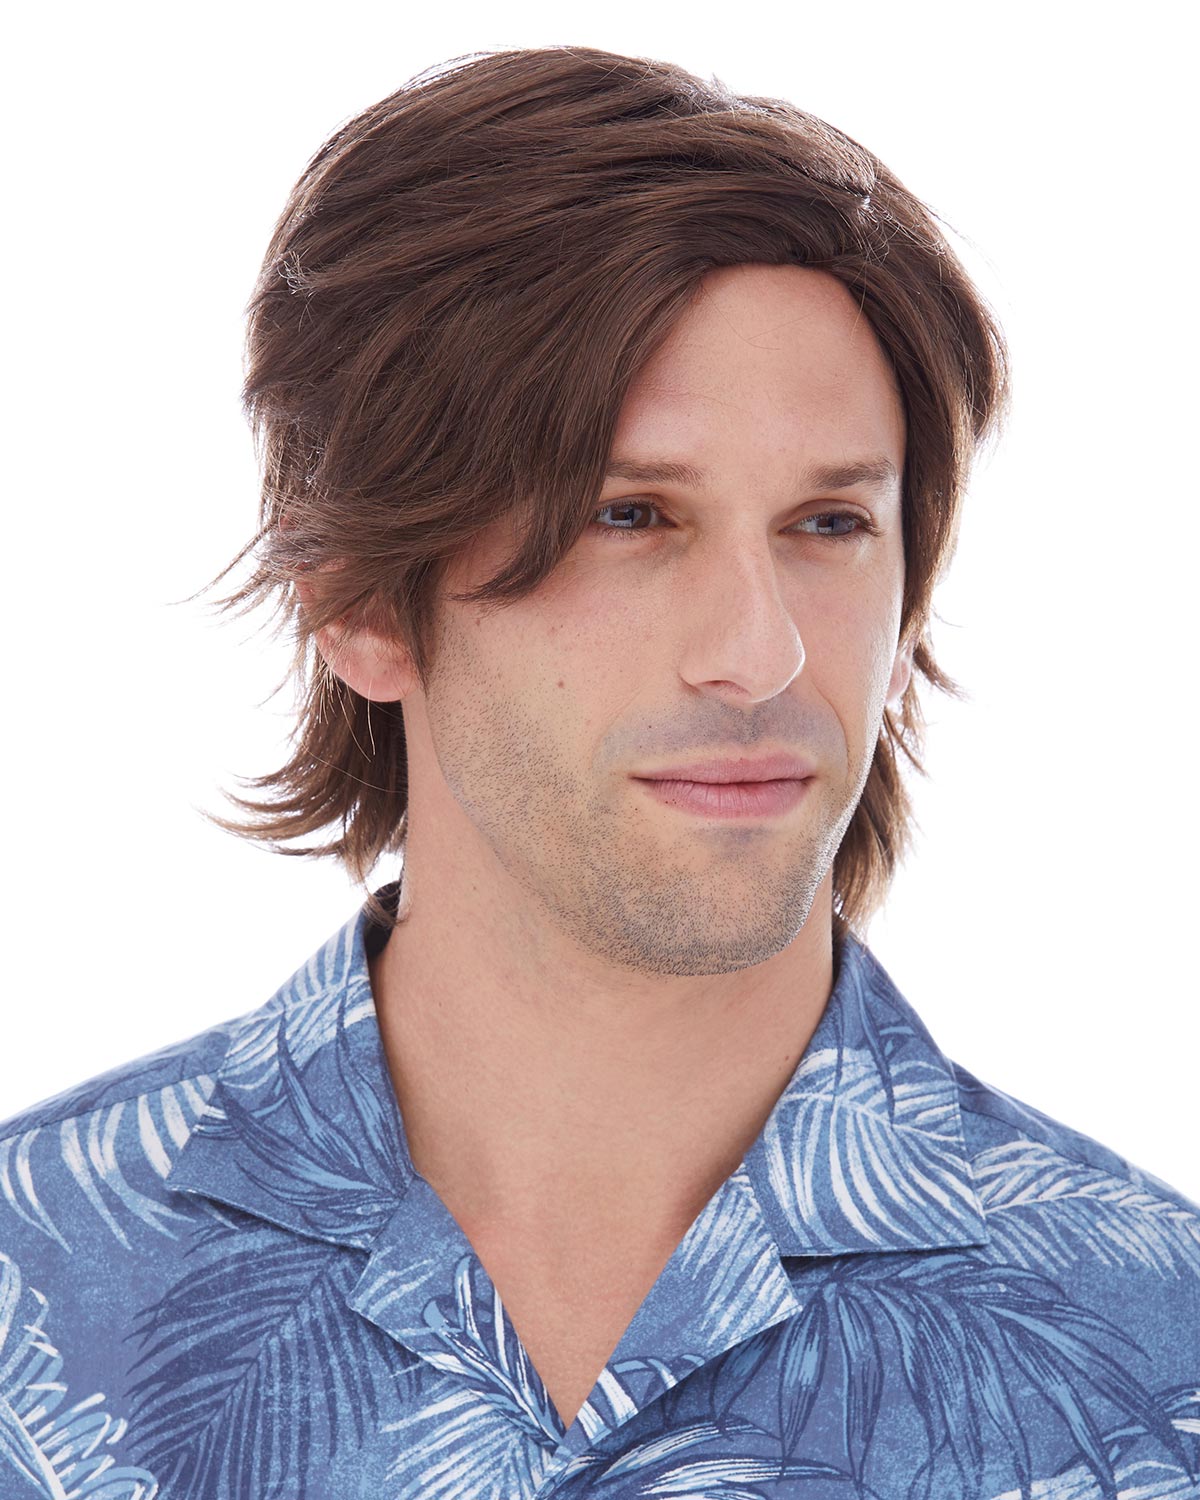 funny wigs for men